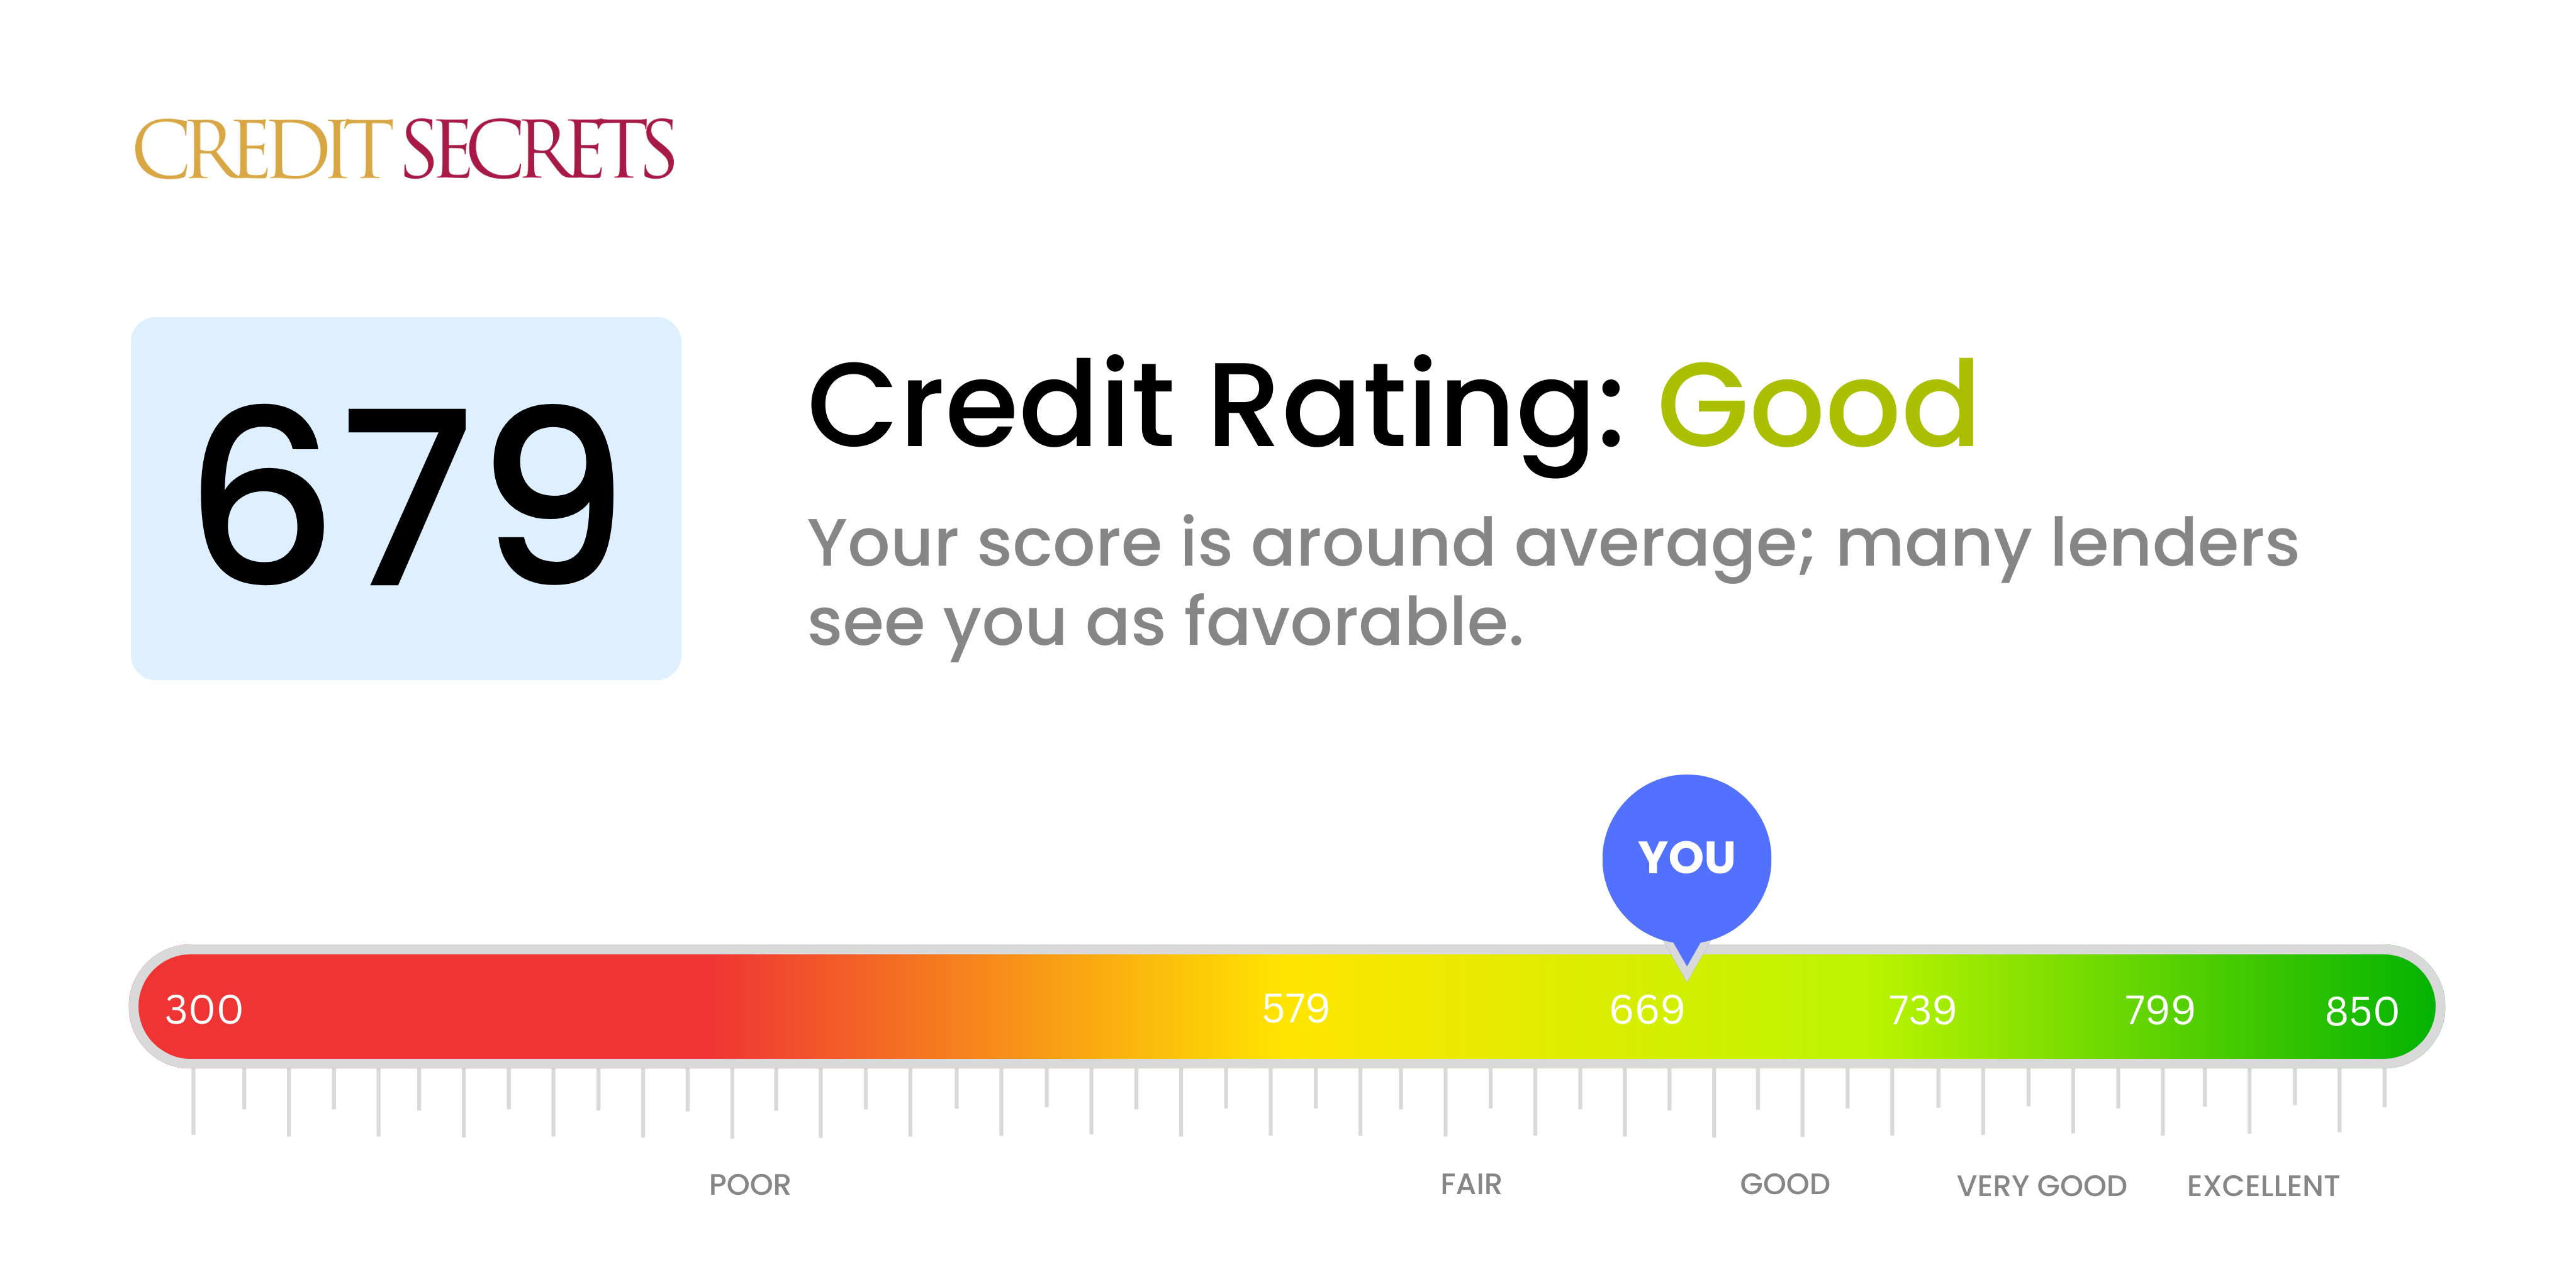 Is 679 a good credit score?